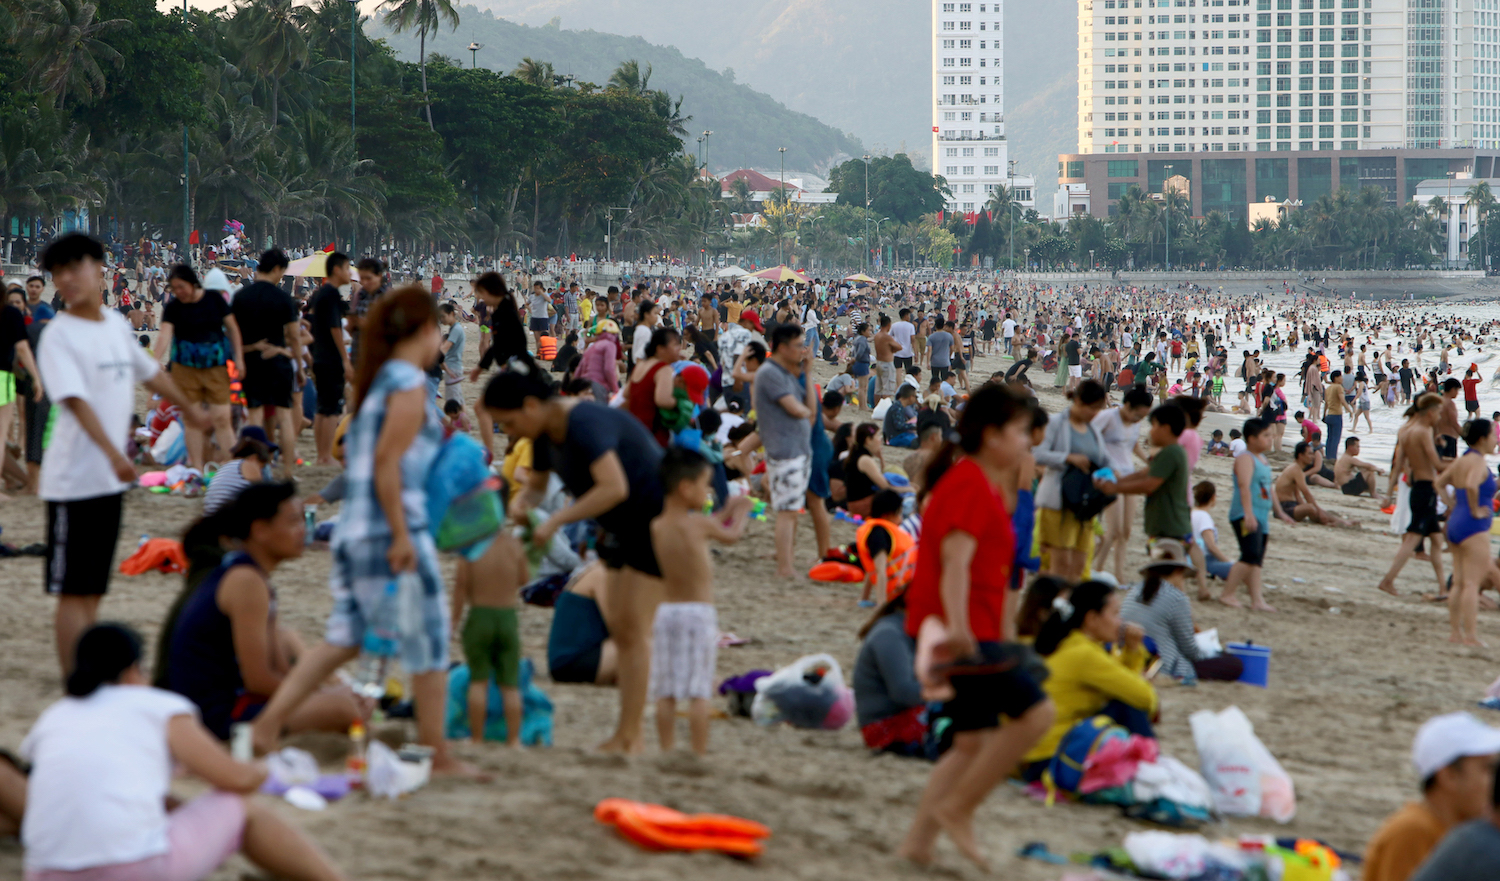 Thousands of people go to a beach in Nha Trang during the Reunification Day-Labor Day holiday in 2021. Photo by VnExpress/Xuan Ngoc